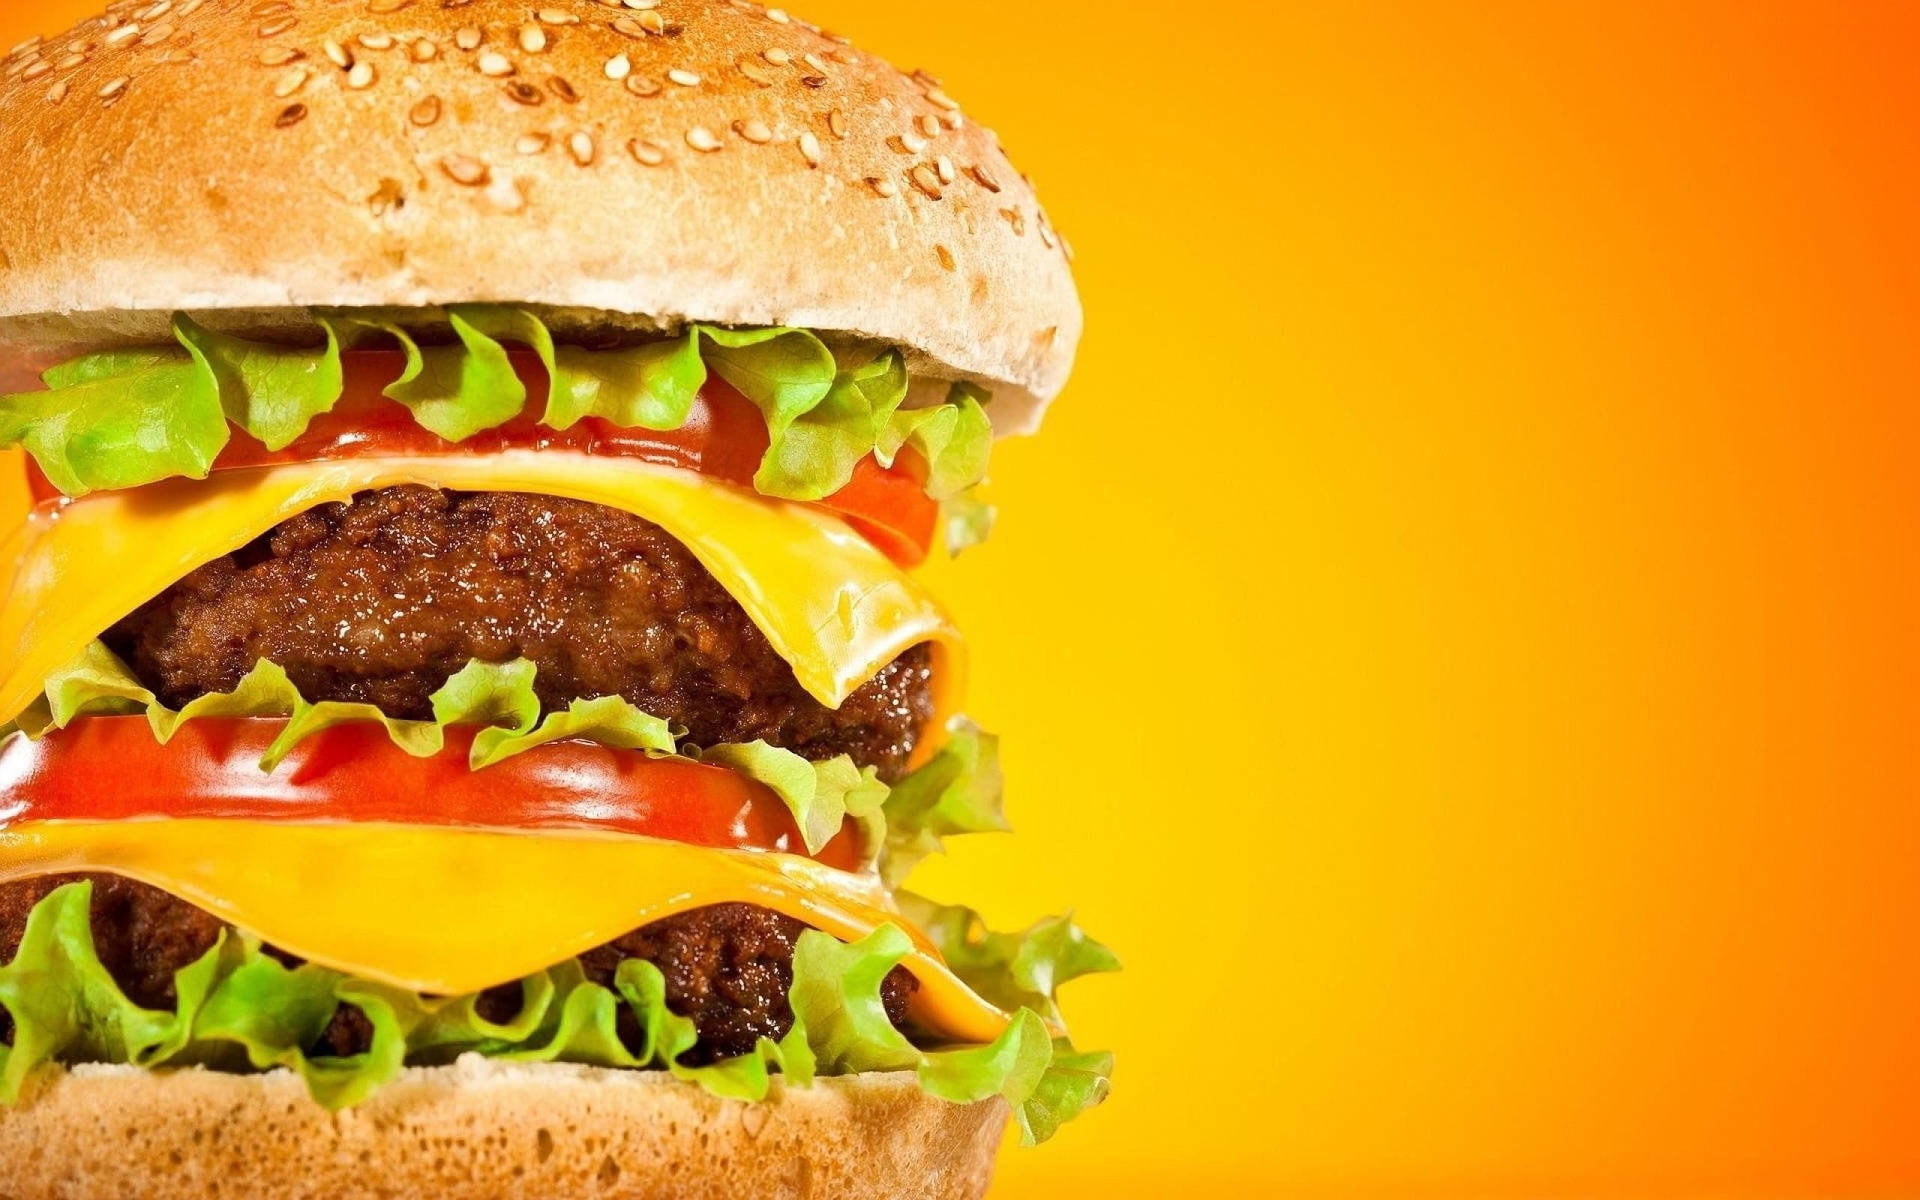 Greasy Cheeseburger On An Orange Background Wallpaper